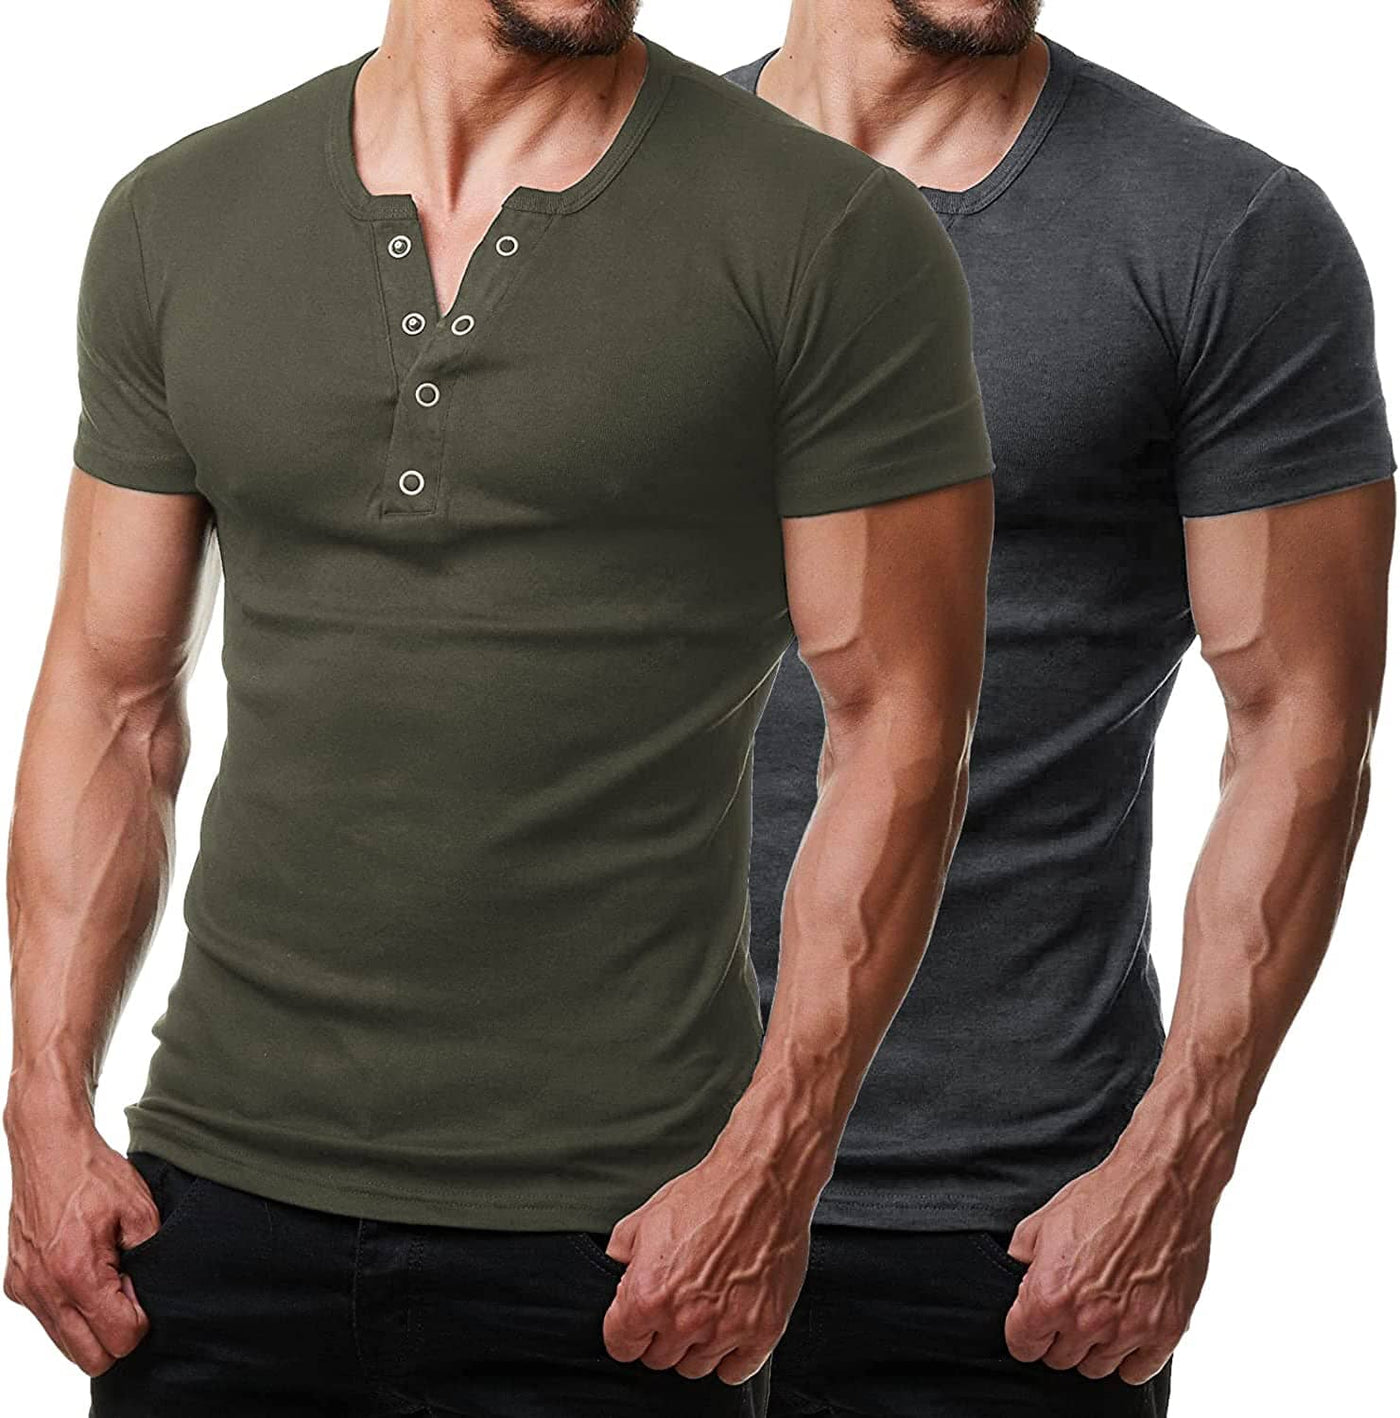 2 Pack Short Sleeve Workout Gym T-Shirt (US Only) T-shirt Coofandy's Army Green/Dark Grey S 